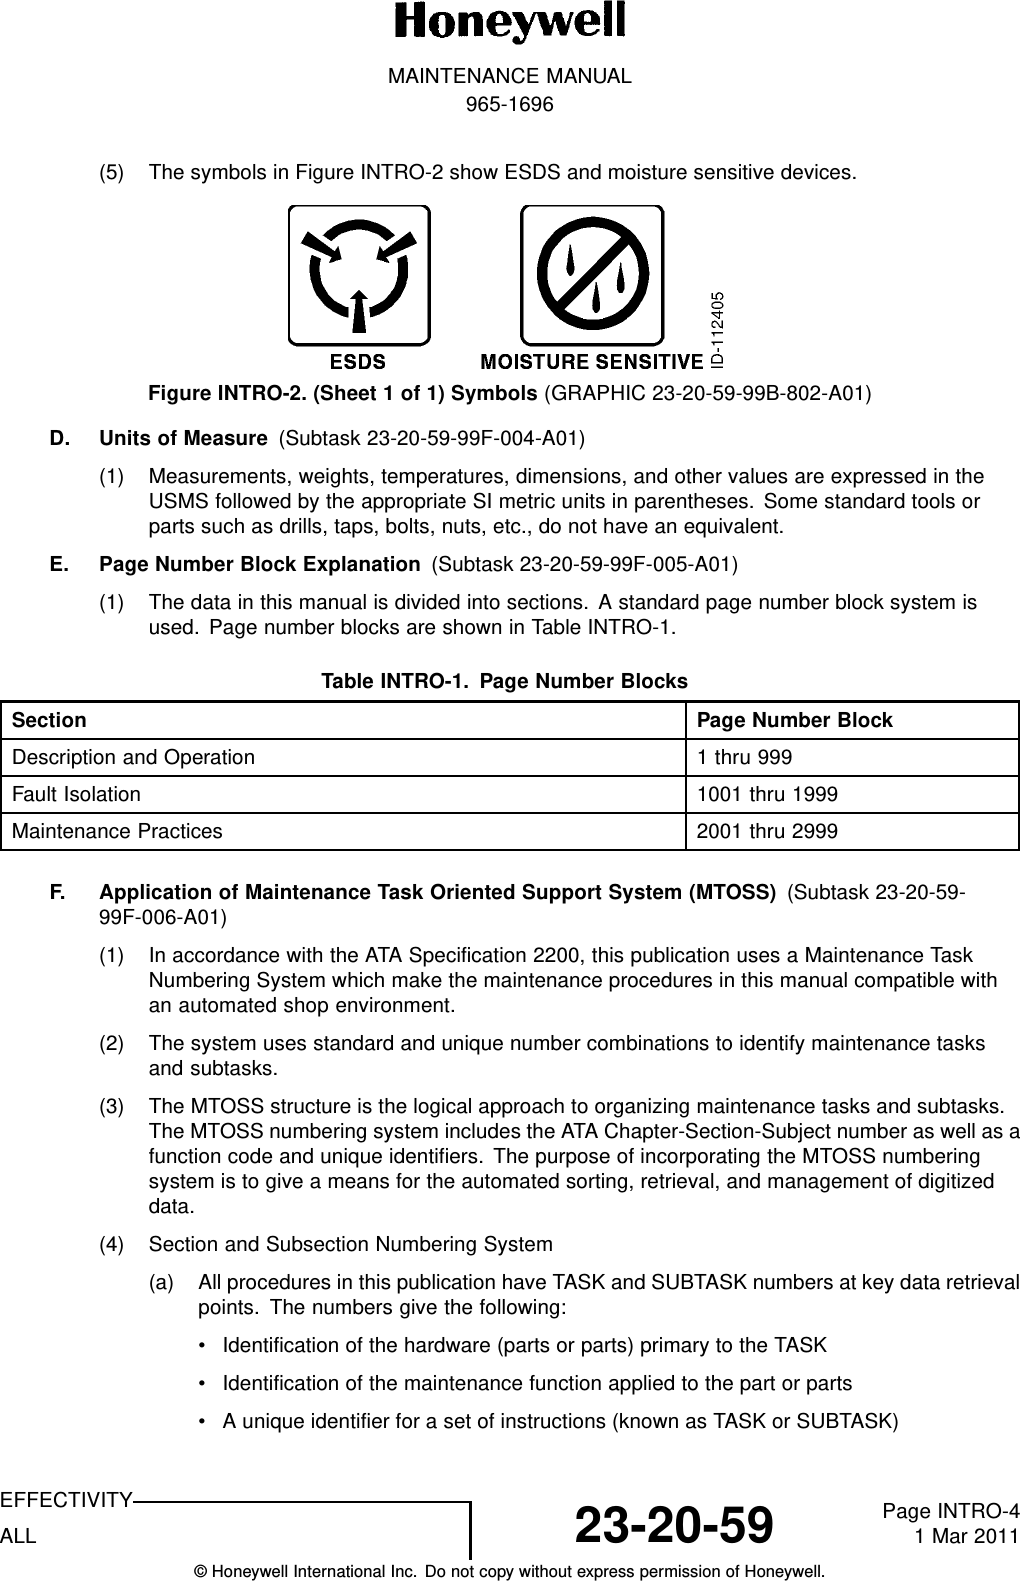 MAINTENANCE MANUAL965-1696(5) The symbols in Figure INTRO-2 show ESDS and moisture sensitive devices.Figure INTRO-2. (Sheet 1 of 1) Symbols (GRAPHIC 23-20-59-99B-802-A01)D. Units of Measure (Subtask 23-20-59-99F-004-A01)(1) Measurements, weights, temperatures, dimensions, and other values are expressed in theUSMS followed by the appropriate SI metric units in parentheses. Some standard tools orparts such as drills, taps, bolts, nuts, etc., do not have an equivalent.E. Page Number Block Explanation (Subtask 23-20-59-99F-005-A01)(1) The data in this manual is divided into sections. A standard page number block system isused. Page number blocks are shown in Table INTRO-1.TableINTRO-1. PageNumberBlocksSection Page Number BlockDescription and Operation 1thru999Fault Isolation 1001 thru 1999Maintenance Practices 2001 thru 2999F. Application of Maintenance Task Oriented Support System (MTOSS) (Subtask 23-20-59-99F-006-A01)(1) In accordance with the ATA Specification 2200, this publication uses a Maintenance TaskNumbering System which make the maintenance procedures in this manual compatible withan automated shop environment.(2) The system uses standard and unique number combinations to identify maintenance tasksand subtasks.(3) The MTOSS structure is the logical approach to organizing maintenance tasks and subtasks.The MTOSS numbering system includes the ATA Chapter-Section-Subject number as well as afunction code and unique identifiers. The purpose of incorporating the MTOSS numberingsystem is to give a means for the automated sorting, retrieval, and management of digitizeddata.(4) Section and Subsection Numbering System(a) All procedures in this publication have TASK and SUBTASK numbers at key data retrievalpoints. The numbers give the following:• Identification of the hardware (parts or parts) primary to the TASK• Identification of the maintenance function applied to the part or parts• A unique identifier for a set of instructions (known as TASK or SUBTASK)EFFECTIVITYALL 23-20-59 Page INTRO-41 Mar 2011© Honeywell International Inc. Do not copy without express permission of Honeywell.